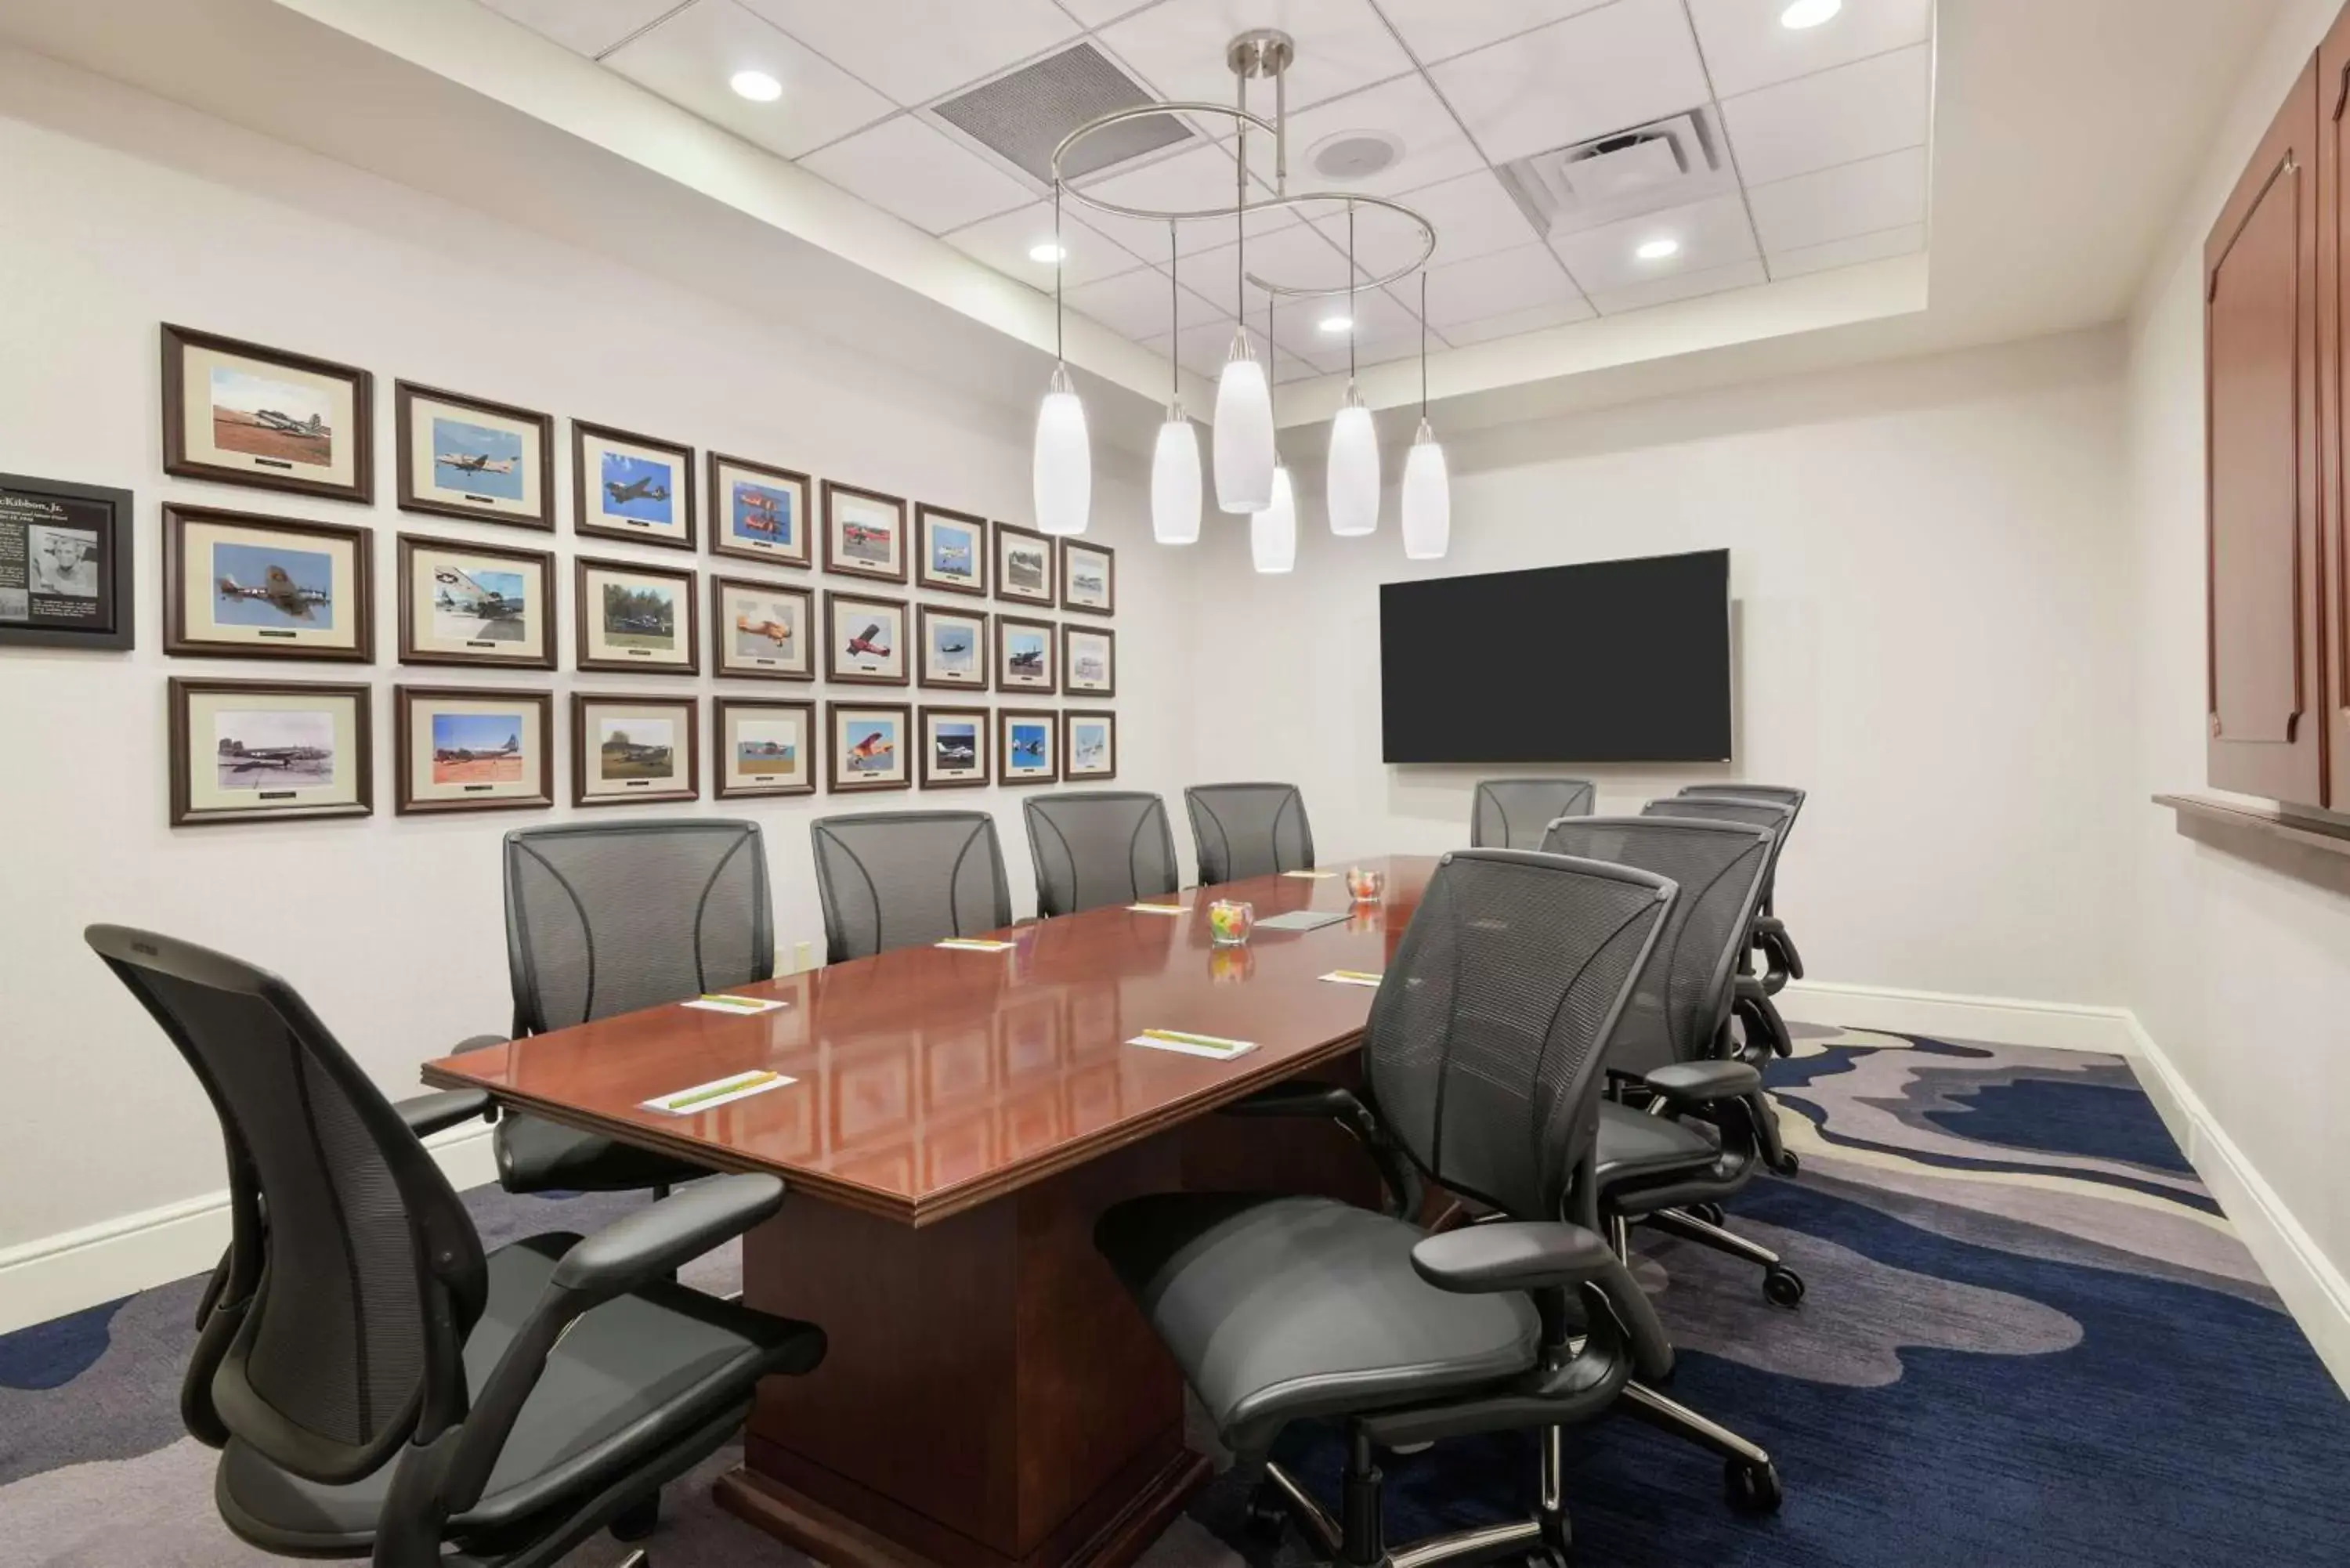 Meeting/conference room in Hilton Garden Inn Tampa Airport/Westshore